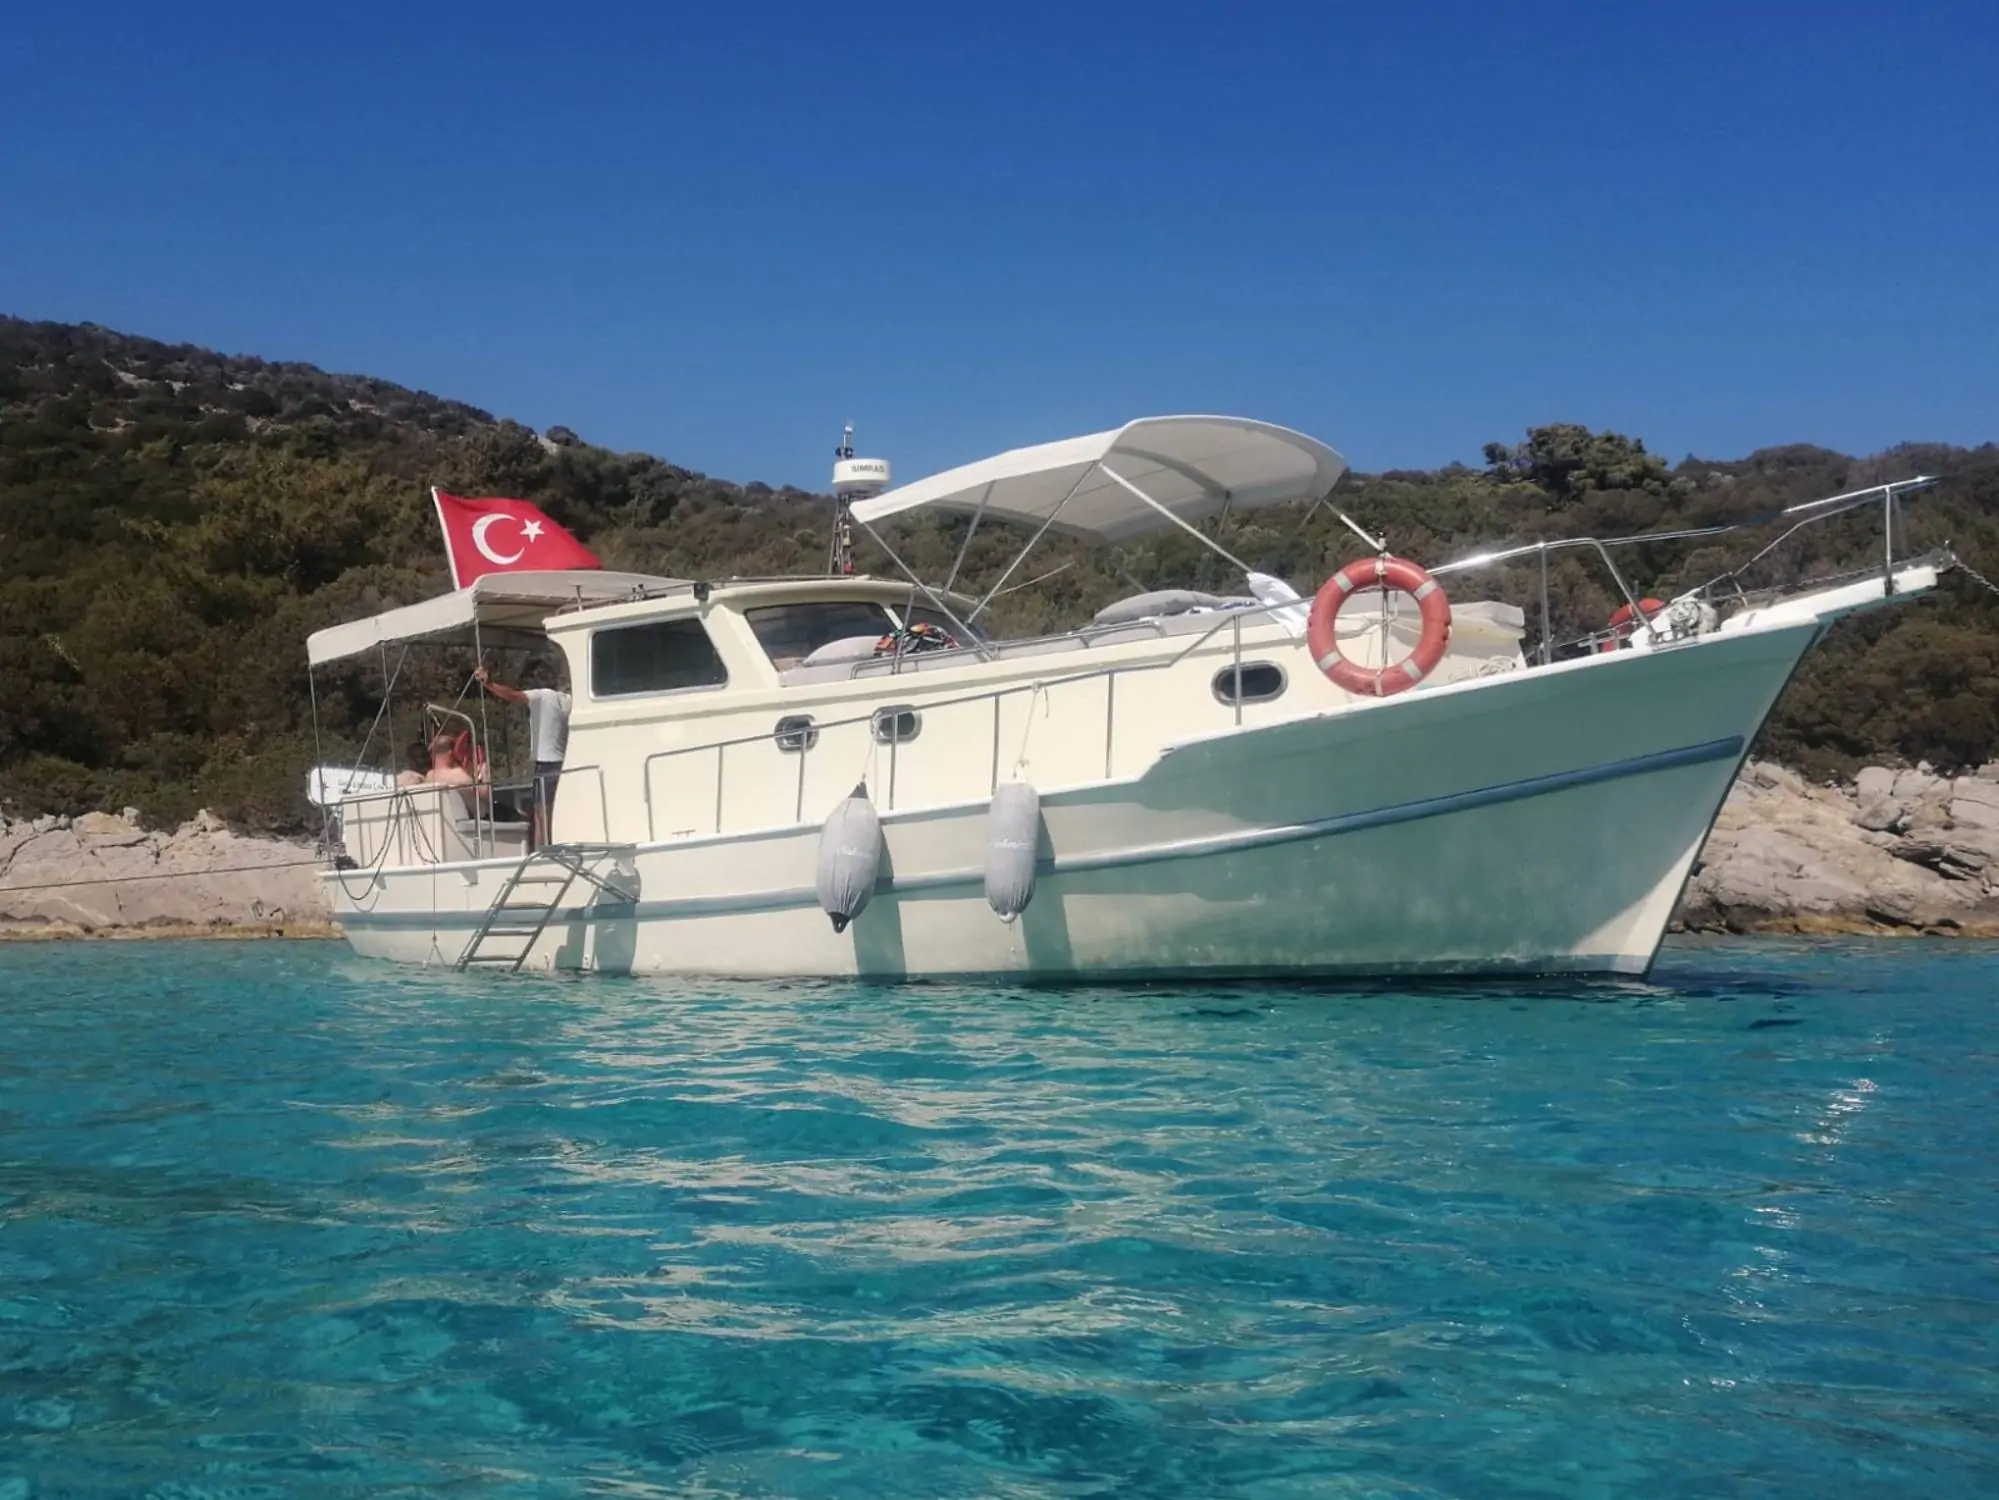 The Best Daily Boat Trip in Bodrum